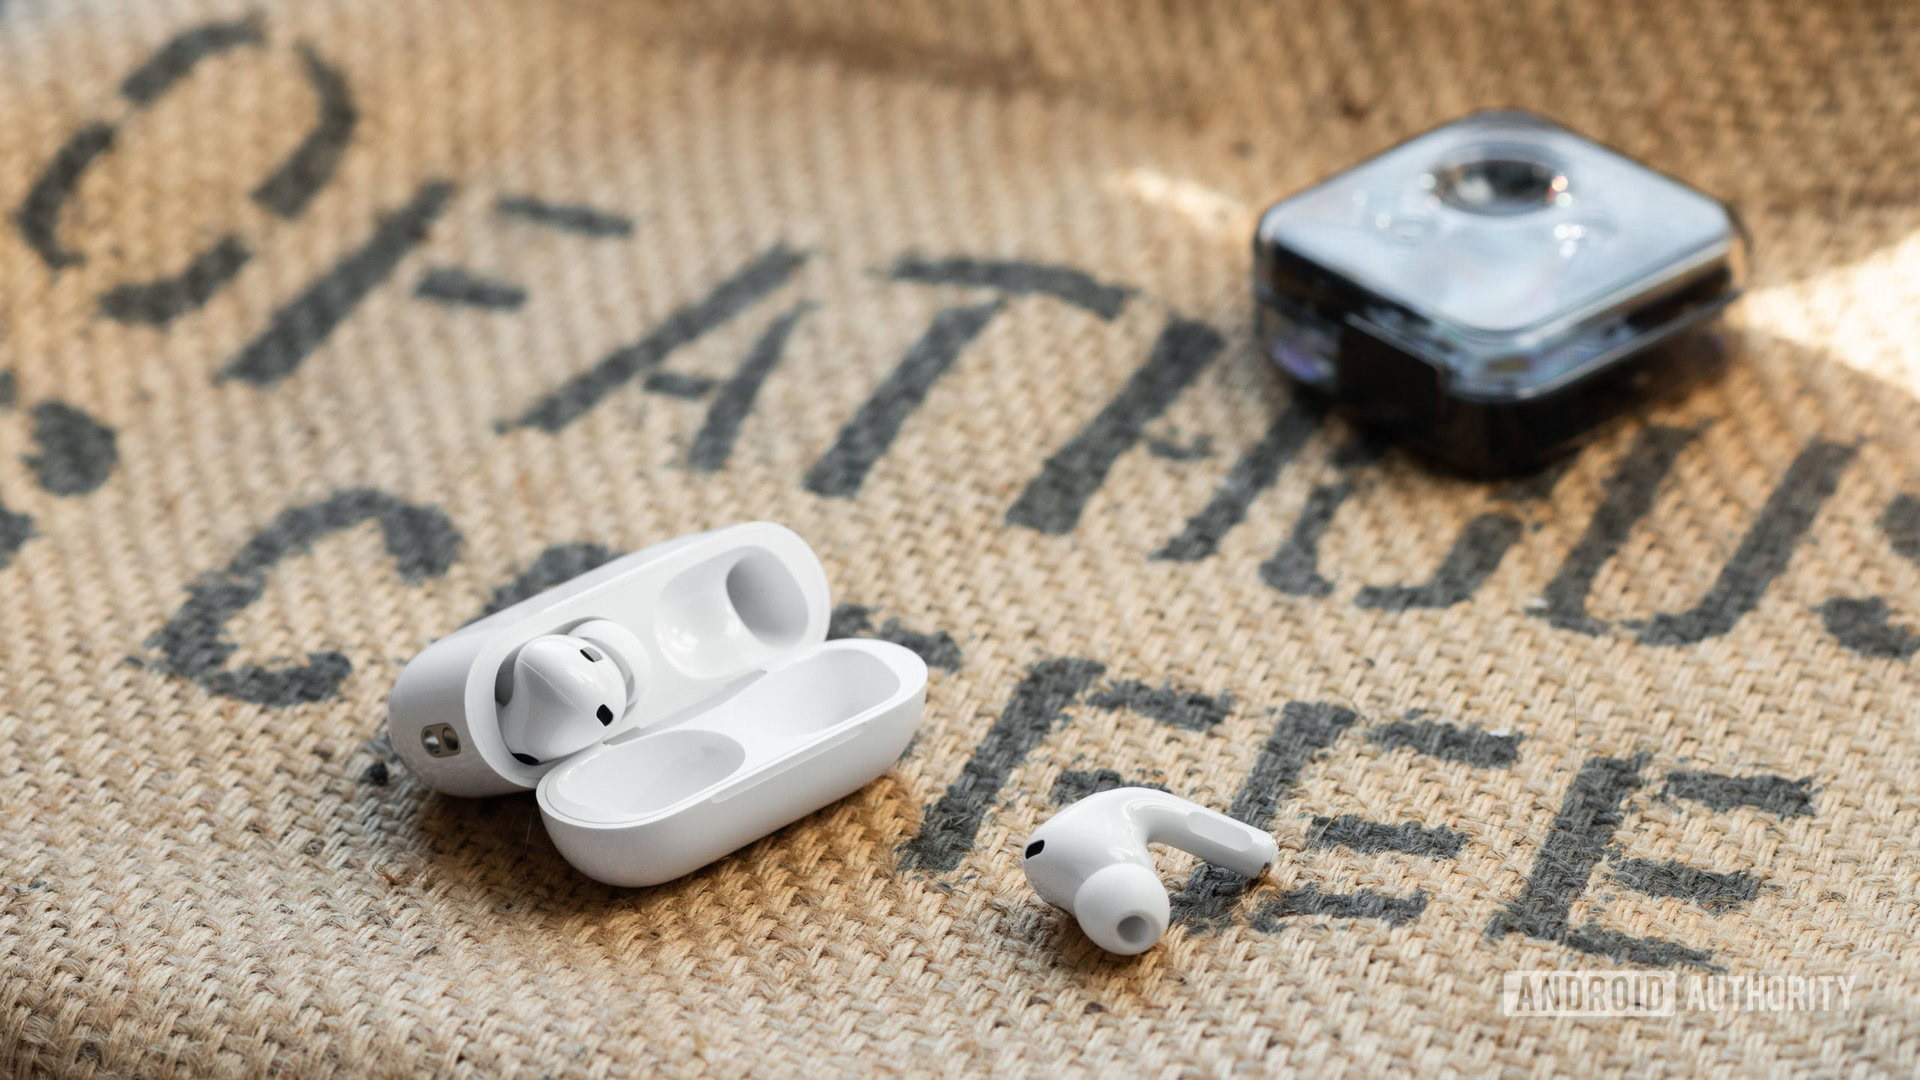 Diskutere Kassér Takt How to fix AirPods Pro and AirPods problems - Android Authority